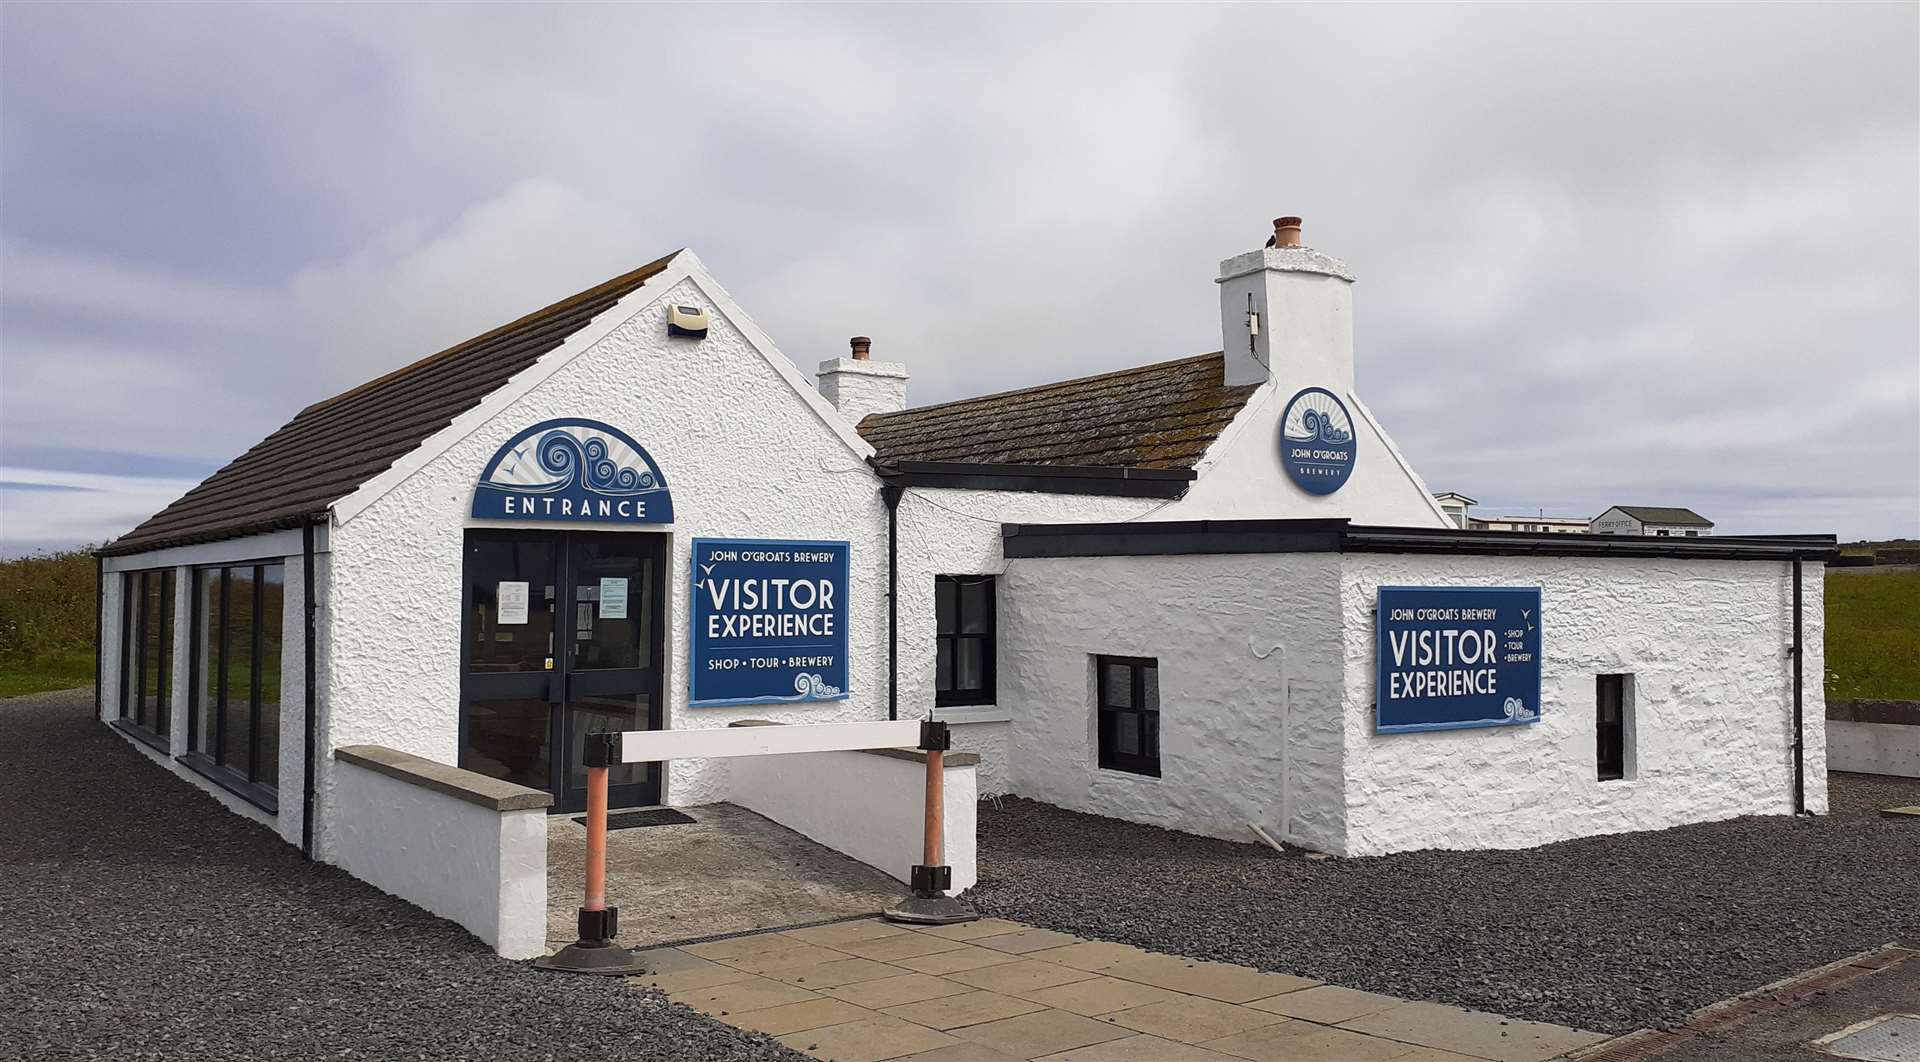 The shop part of the John O'Groats Brewery development at the Last House is now open.